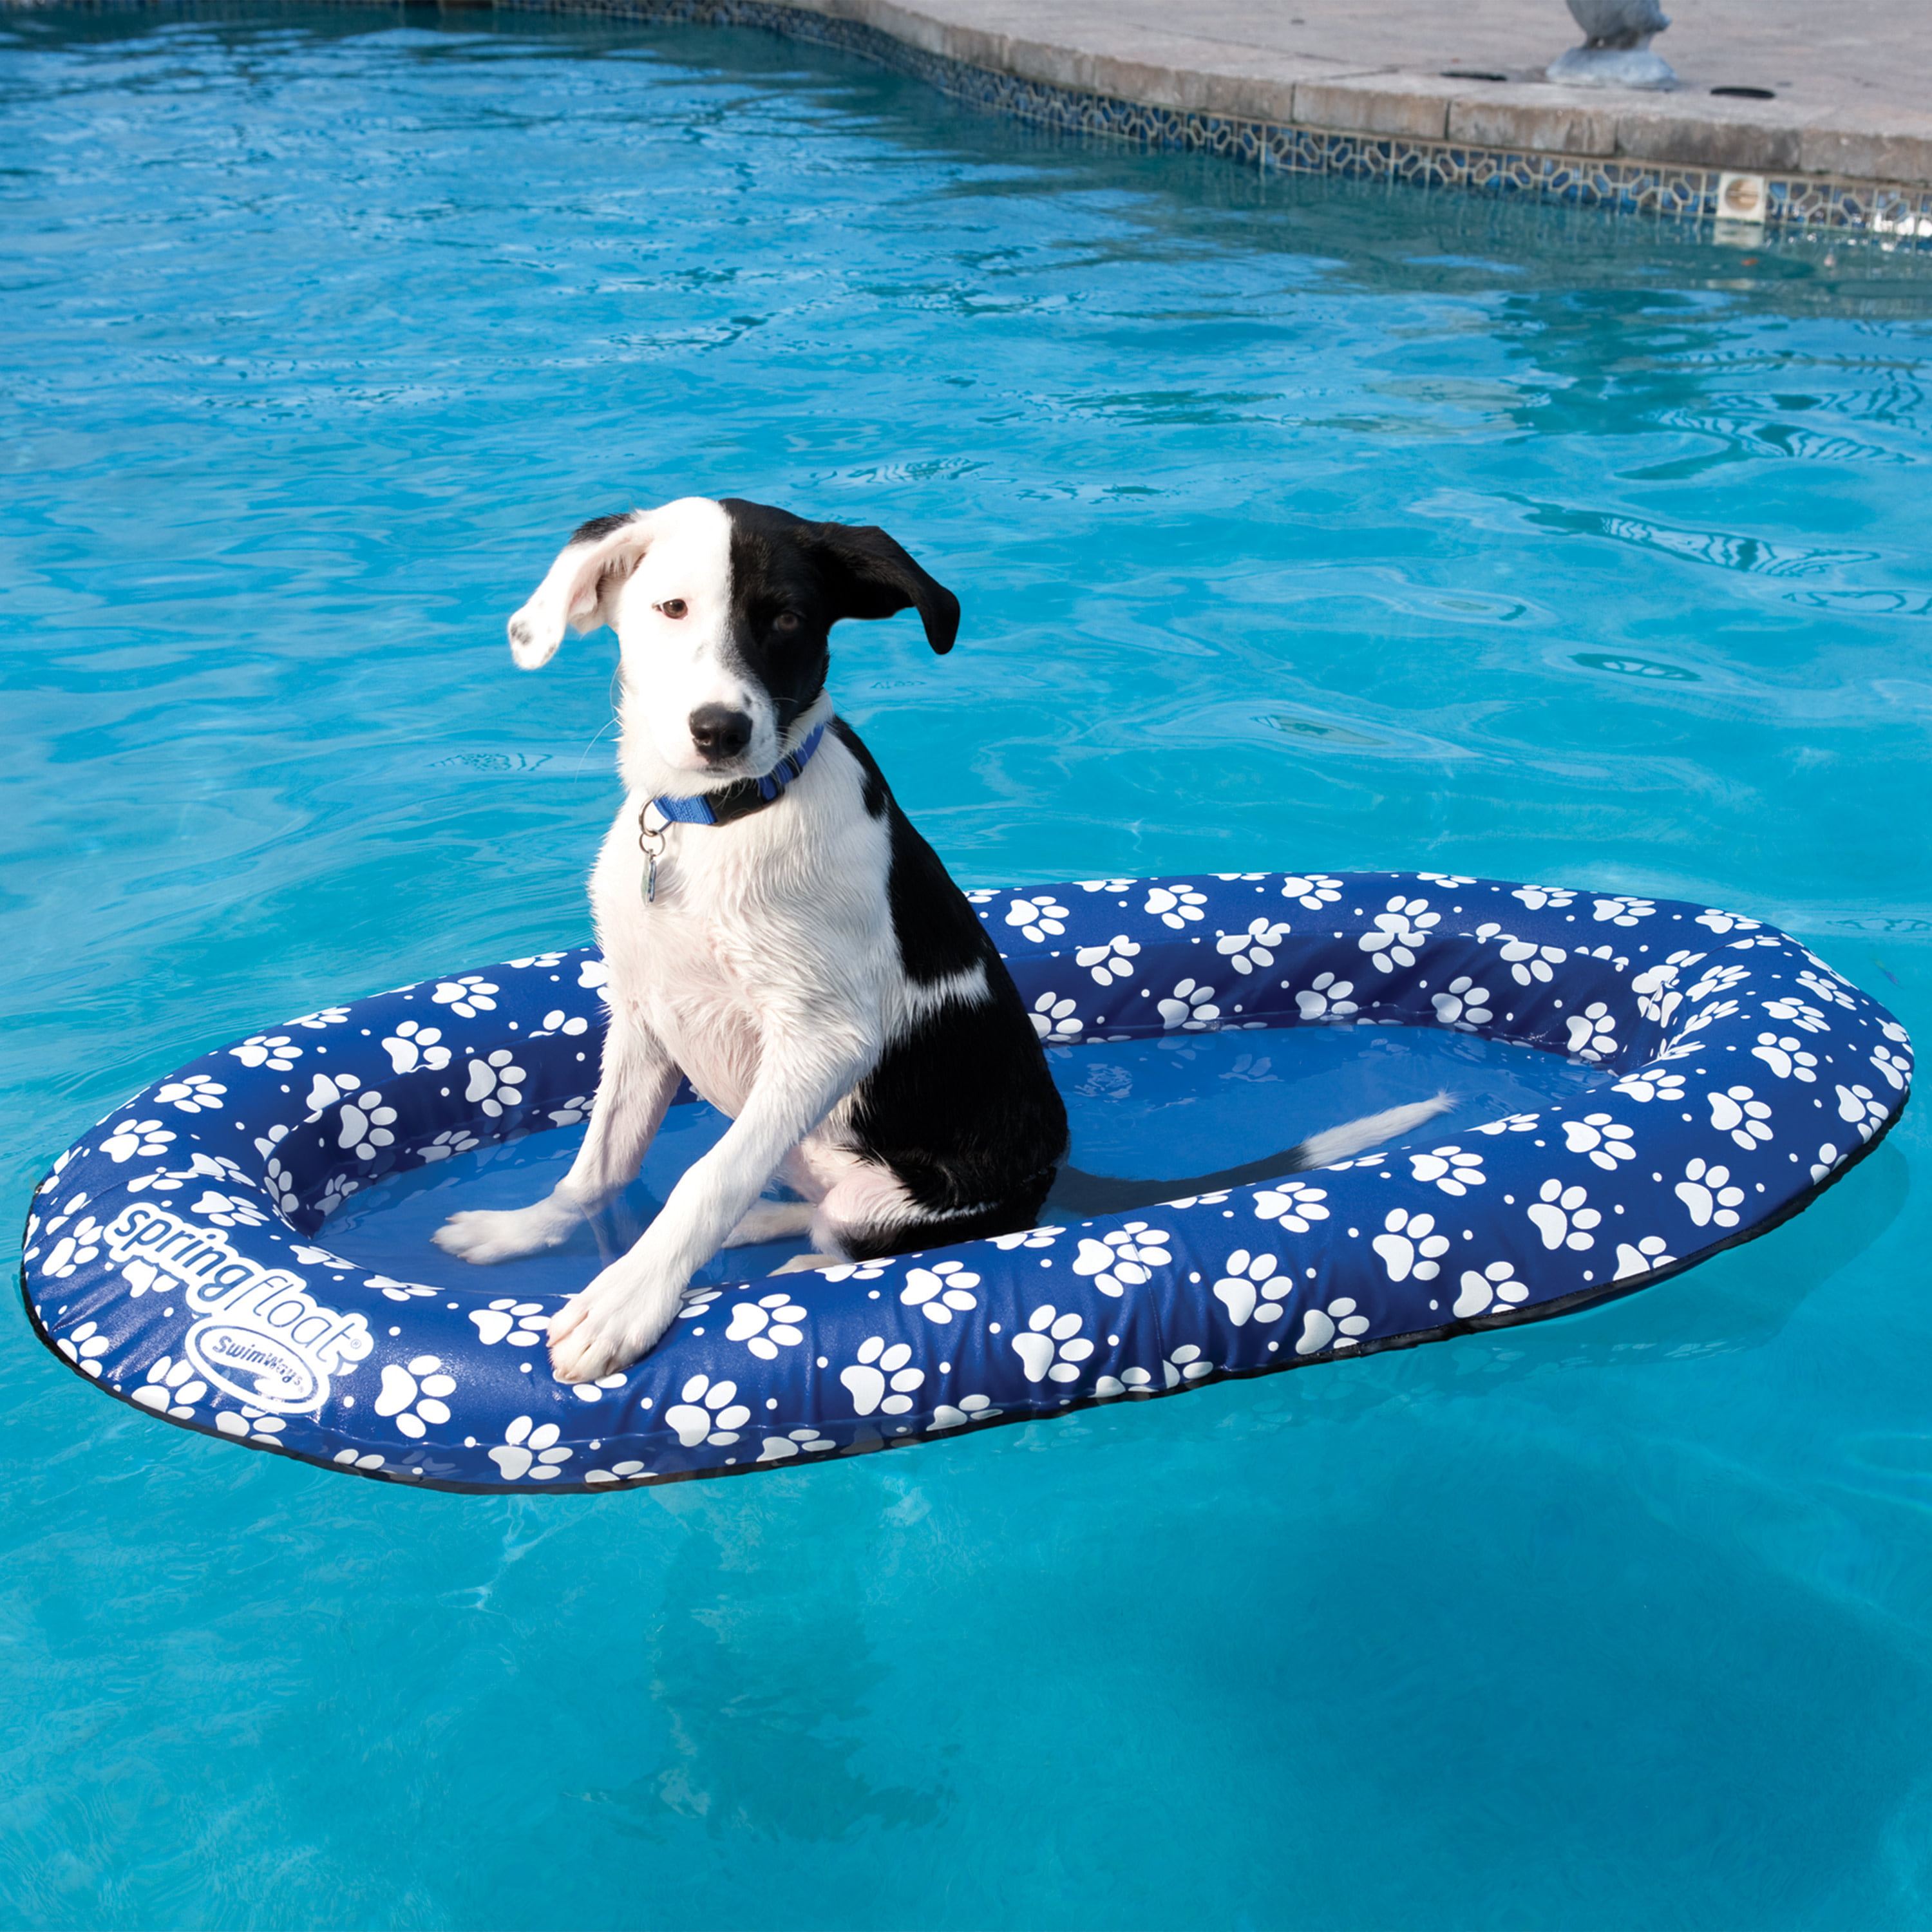 SwimWays Aquaria Solana Lounge Float Lounger for Swimming Pool Lounging Blue 